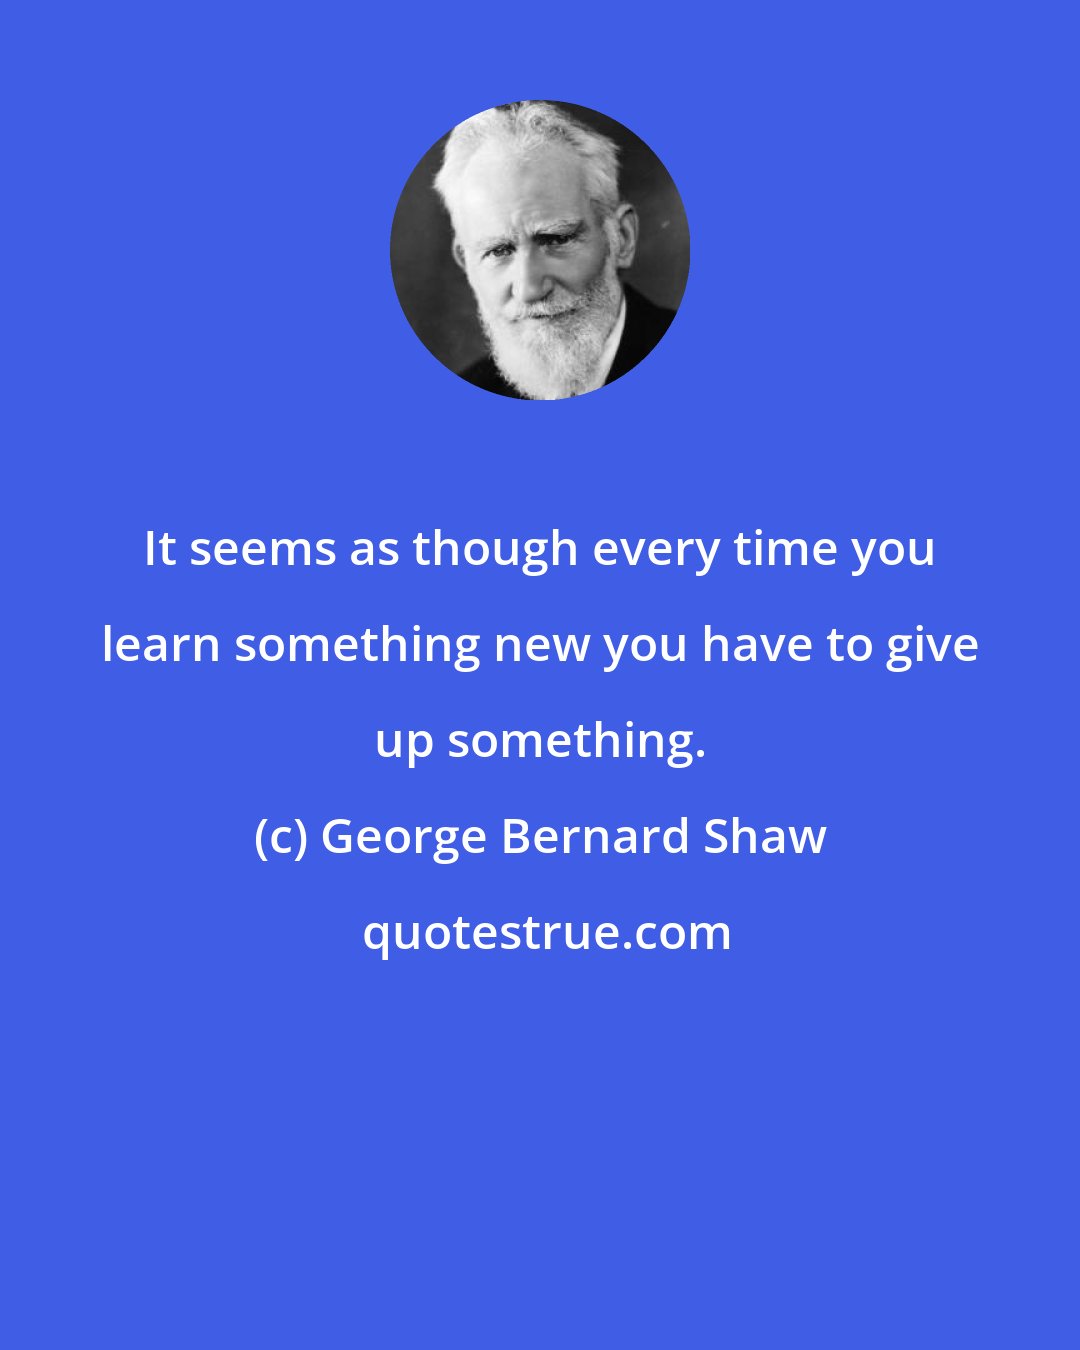 George Bernard Shaw: It seems as though every time you learn something new you have to give up something.